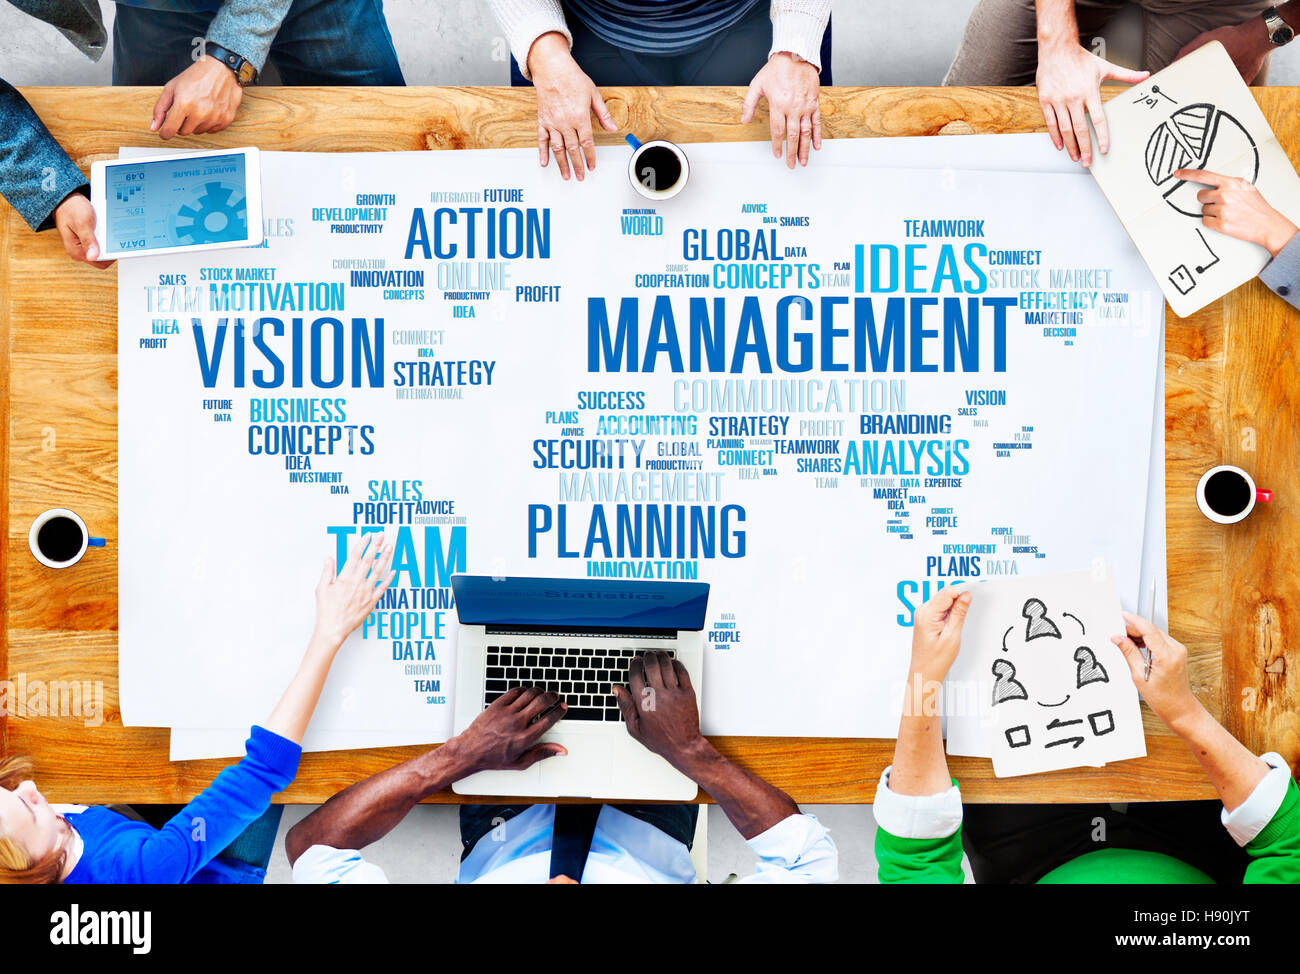 Global Management Training Vision World Map Concept Stock Photo